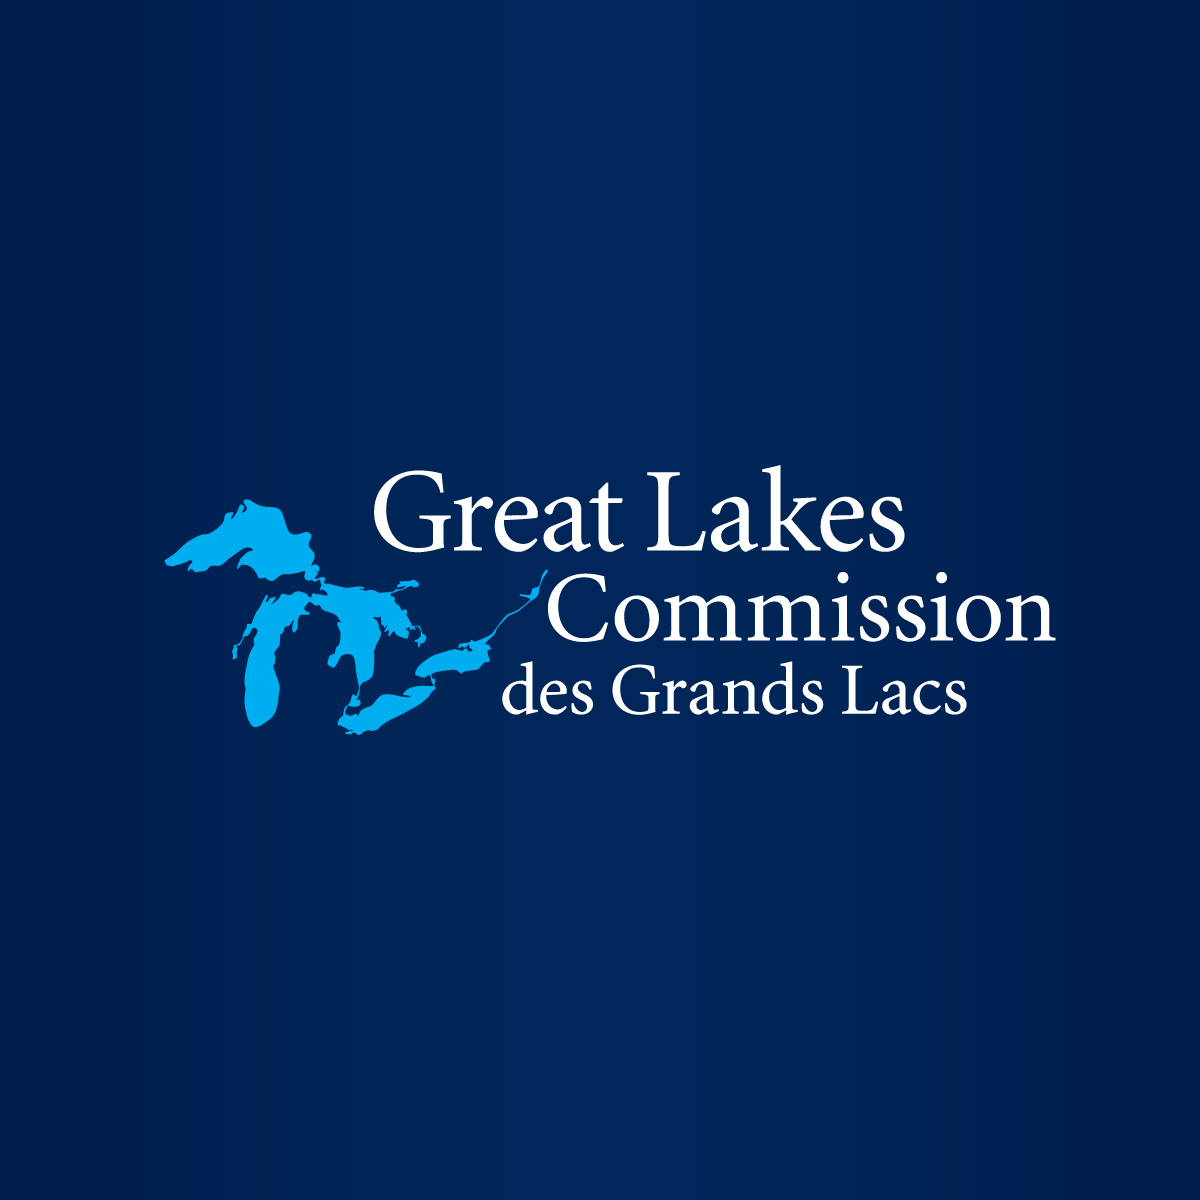 oswego to host first summer 2022 great lakes ecosystem education exchange workshop july 25 at rice creek field station